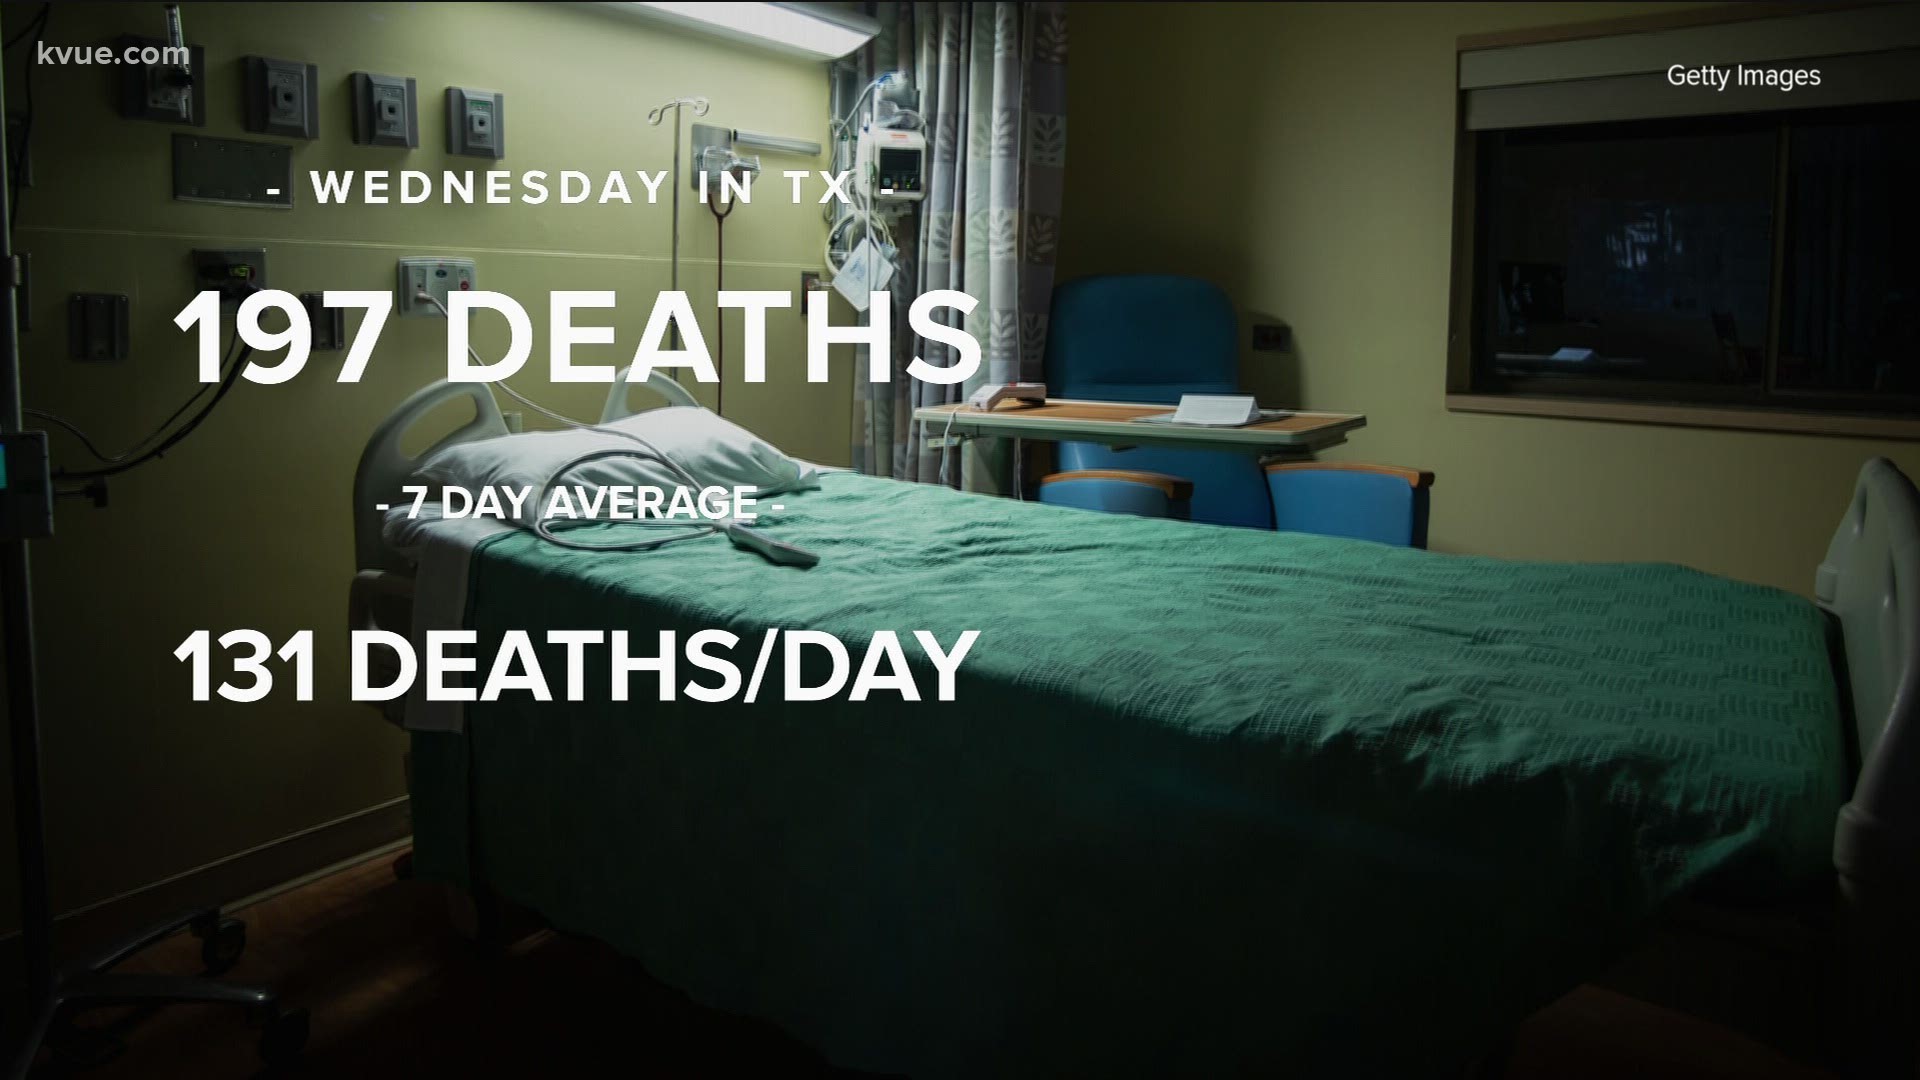 Texas reported 197 COVID-19 deaths statewide in a single day, bringing the average for the past week up to 131 deaths per day.